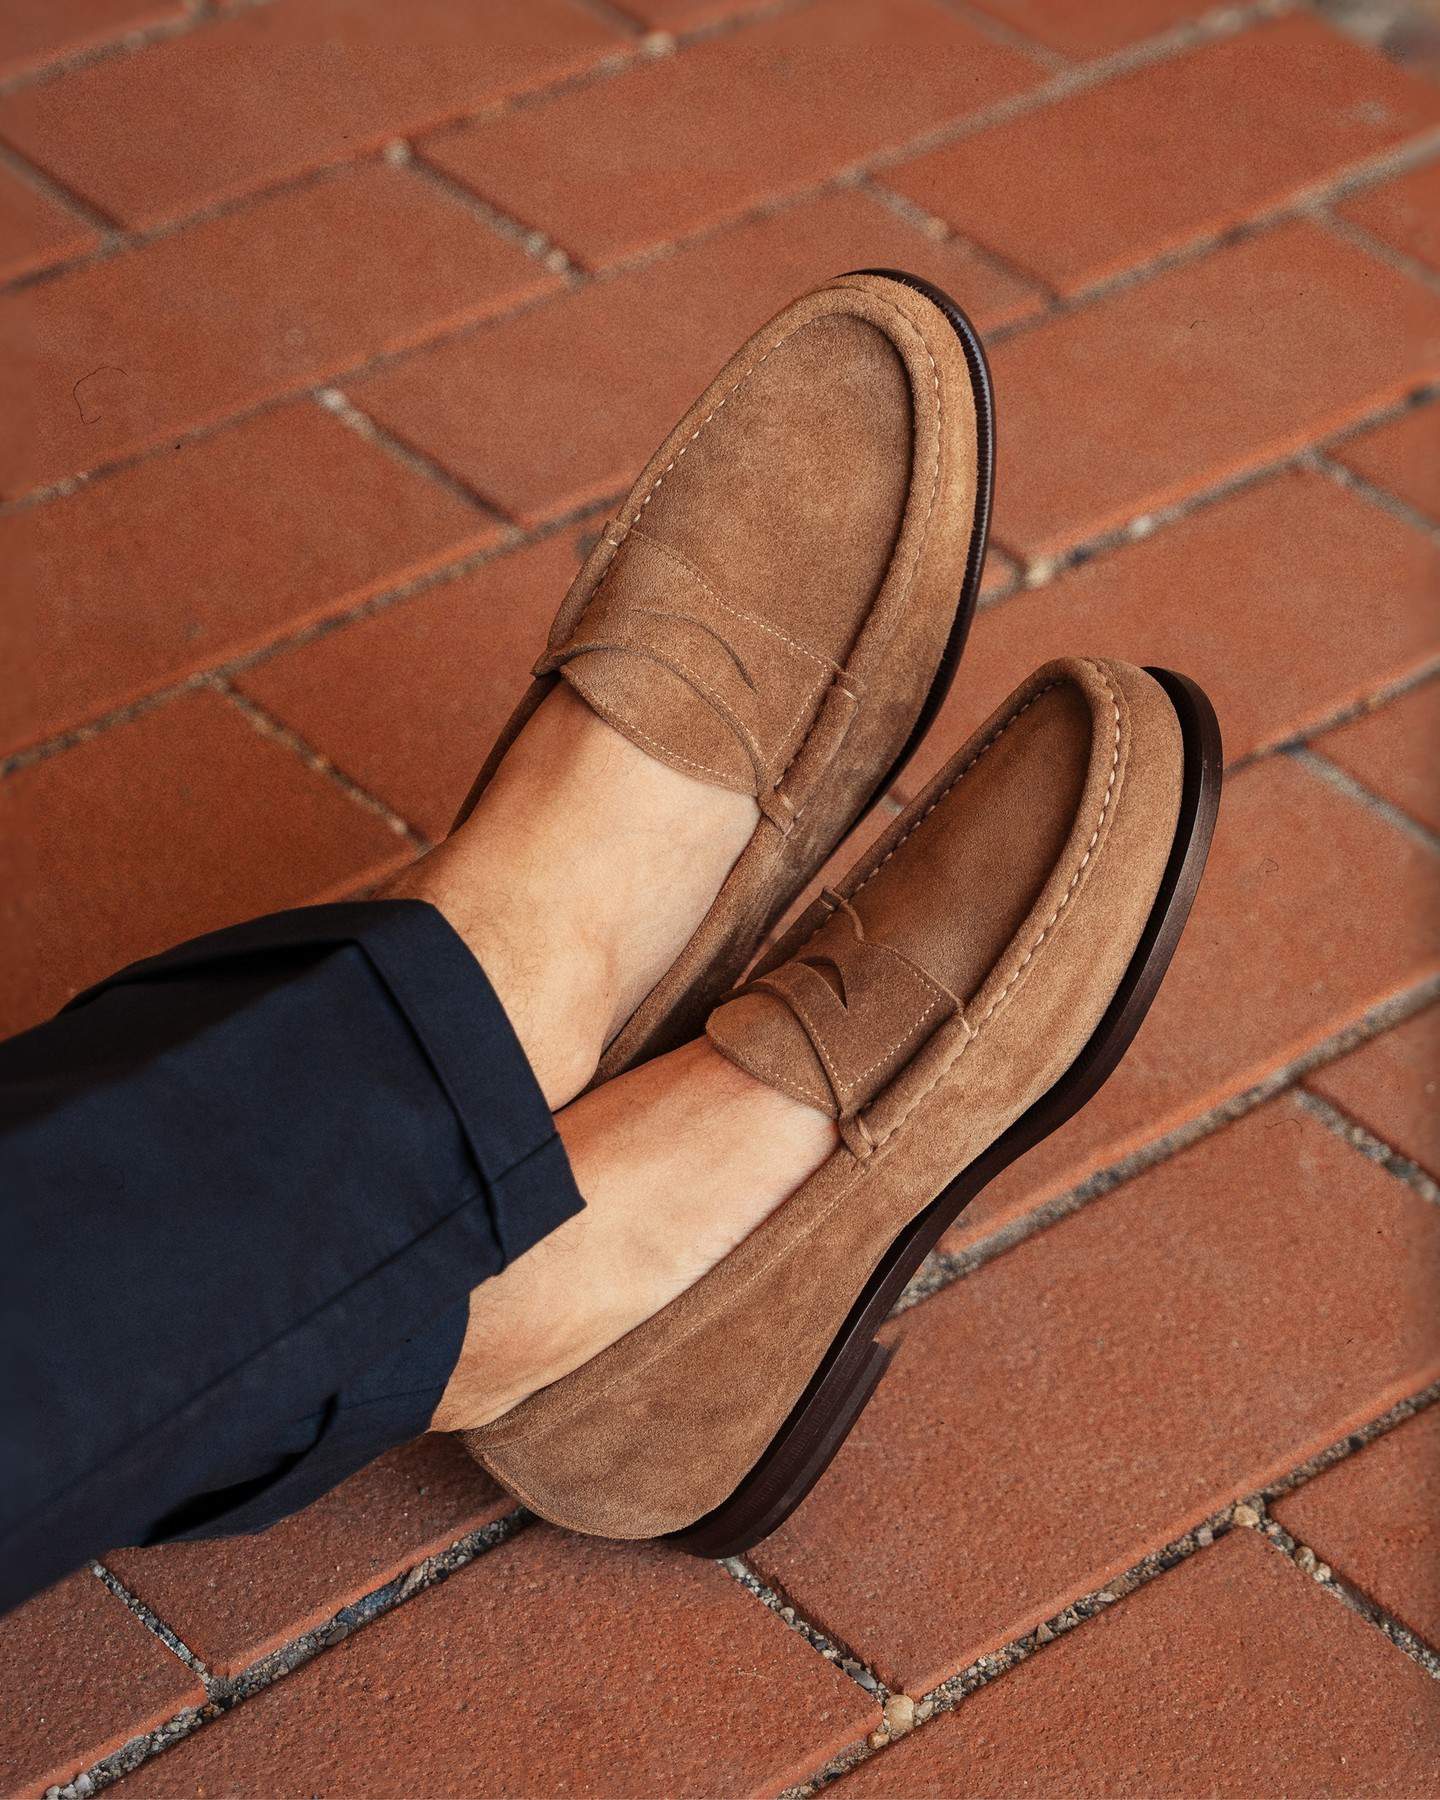 wearing a pair of Sfoderato penny loafers by velasca